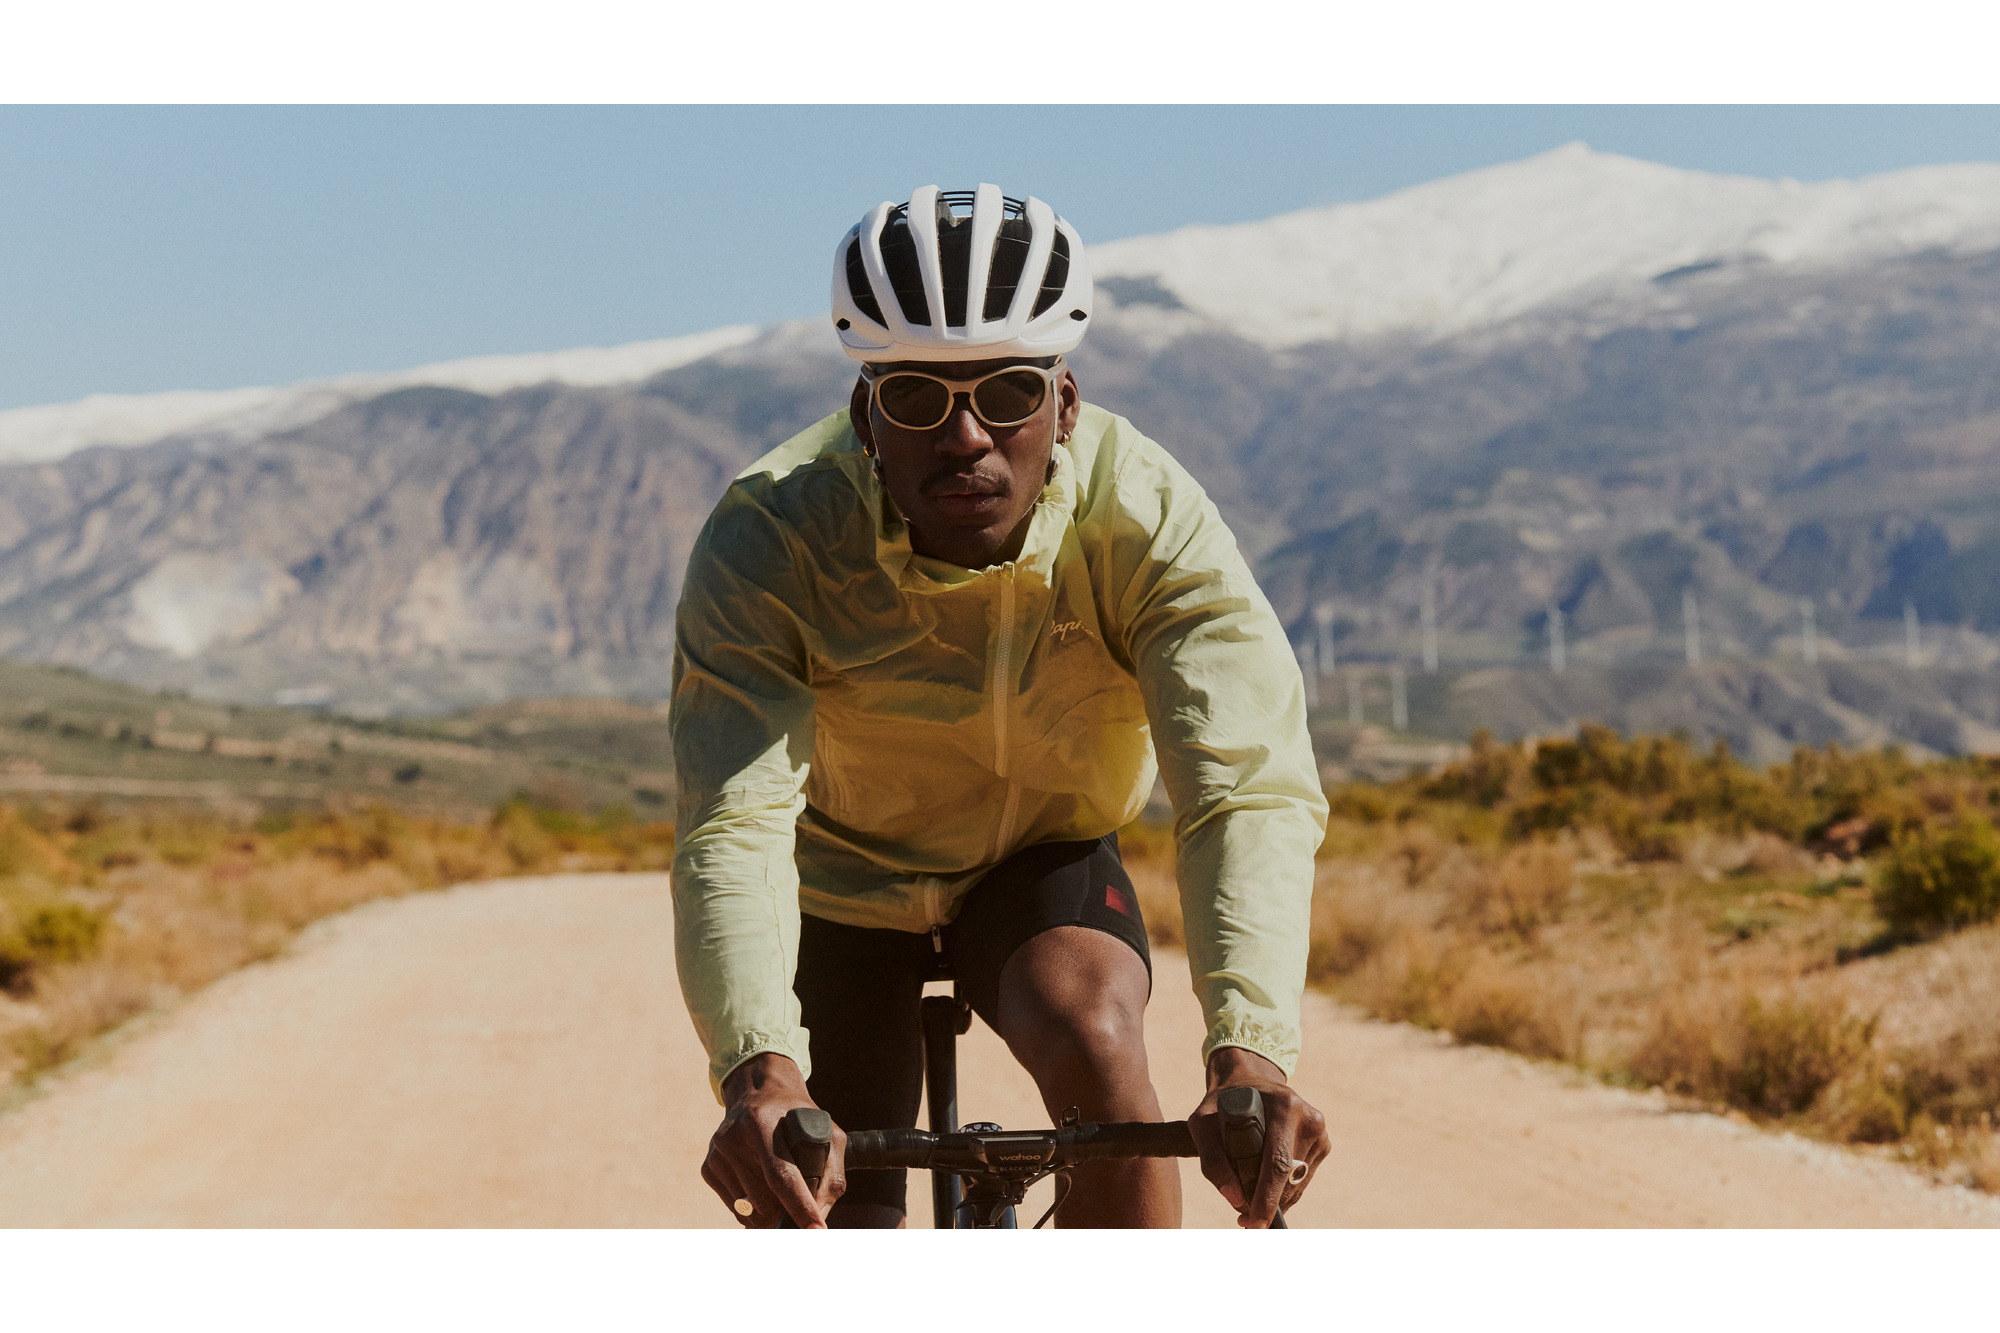 Ride into the future with Rapha's three new sunglasses frames